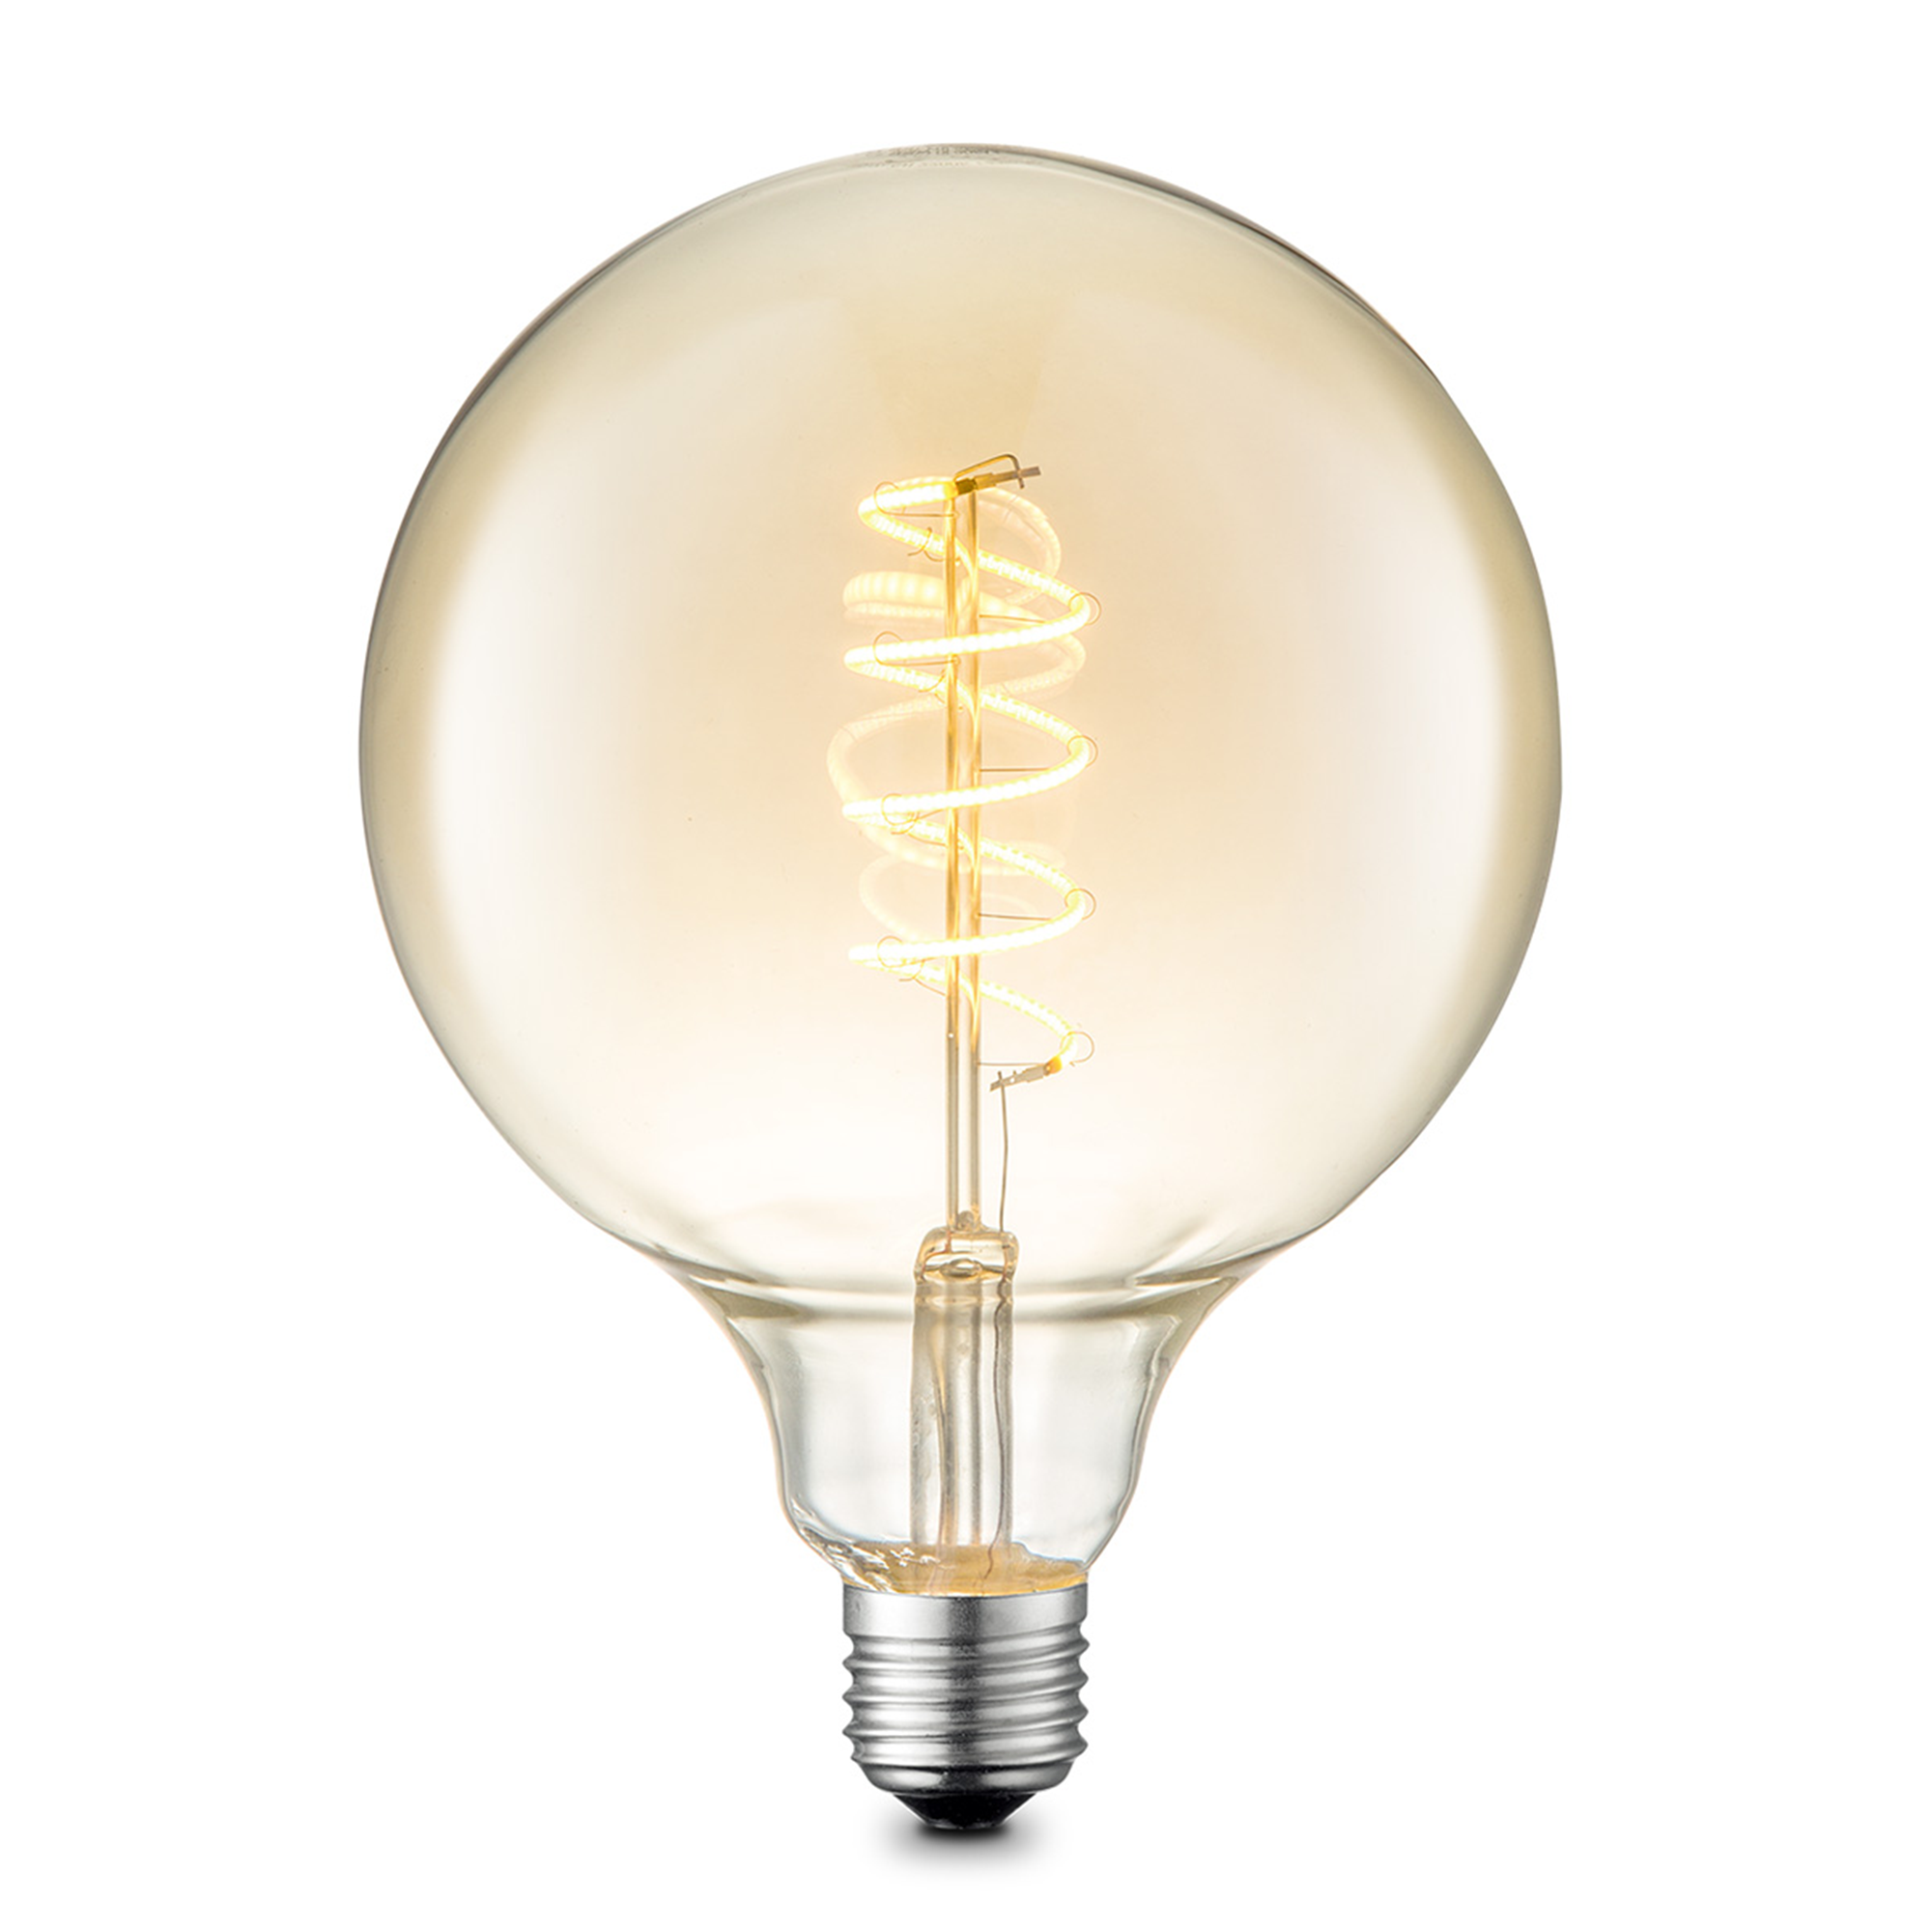 LED-Leuchtmittel 'Spiral' amber E27 4W 240 lm dimmbar + product picture